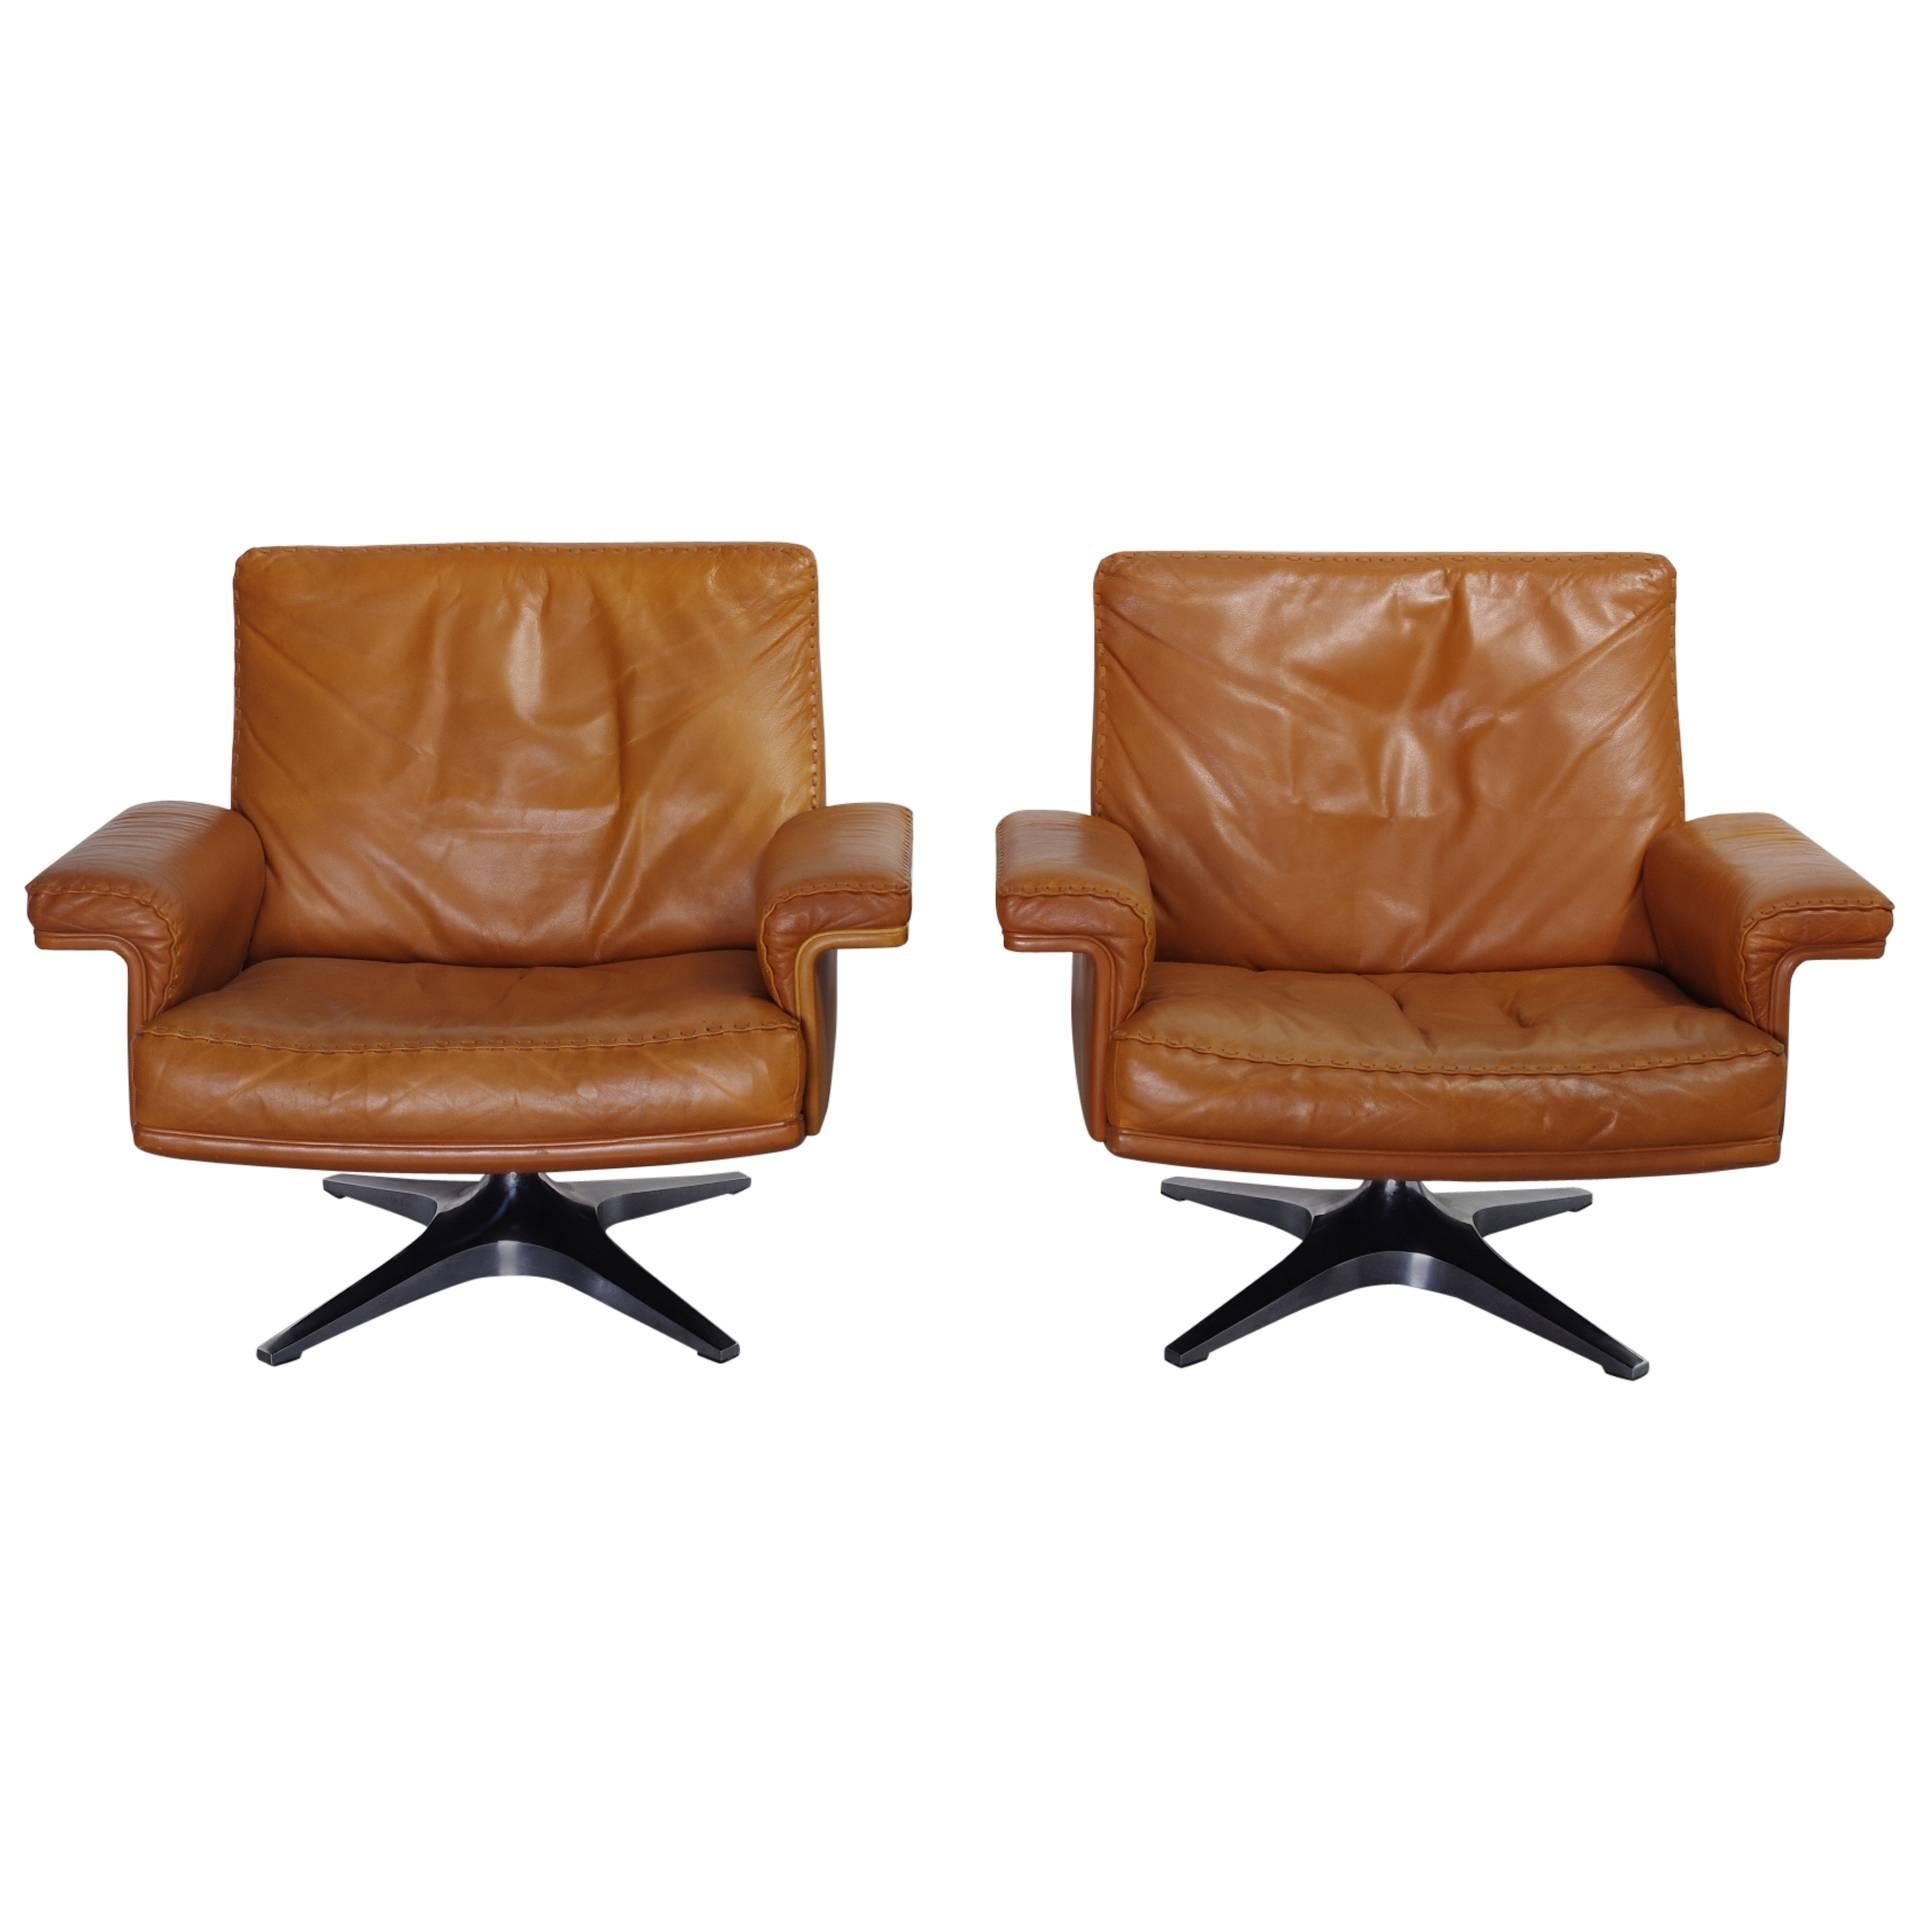 De Sede Ds31 Lowback Swivel Club Chair (one available) For Sale